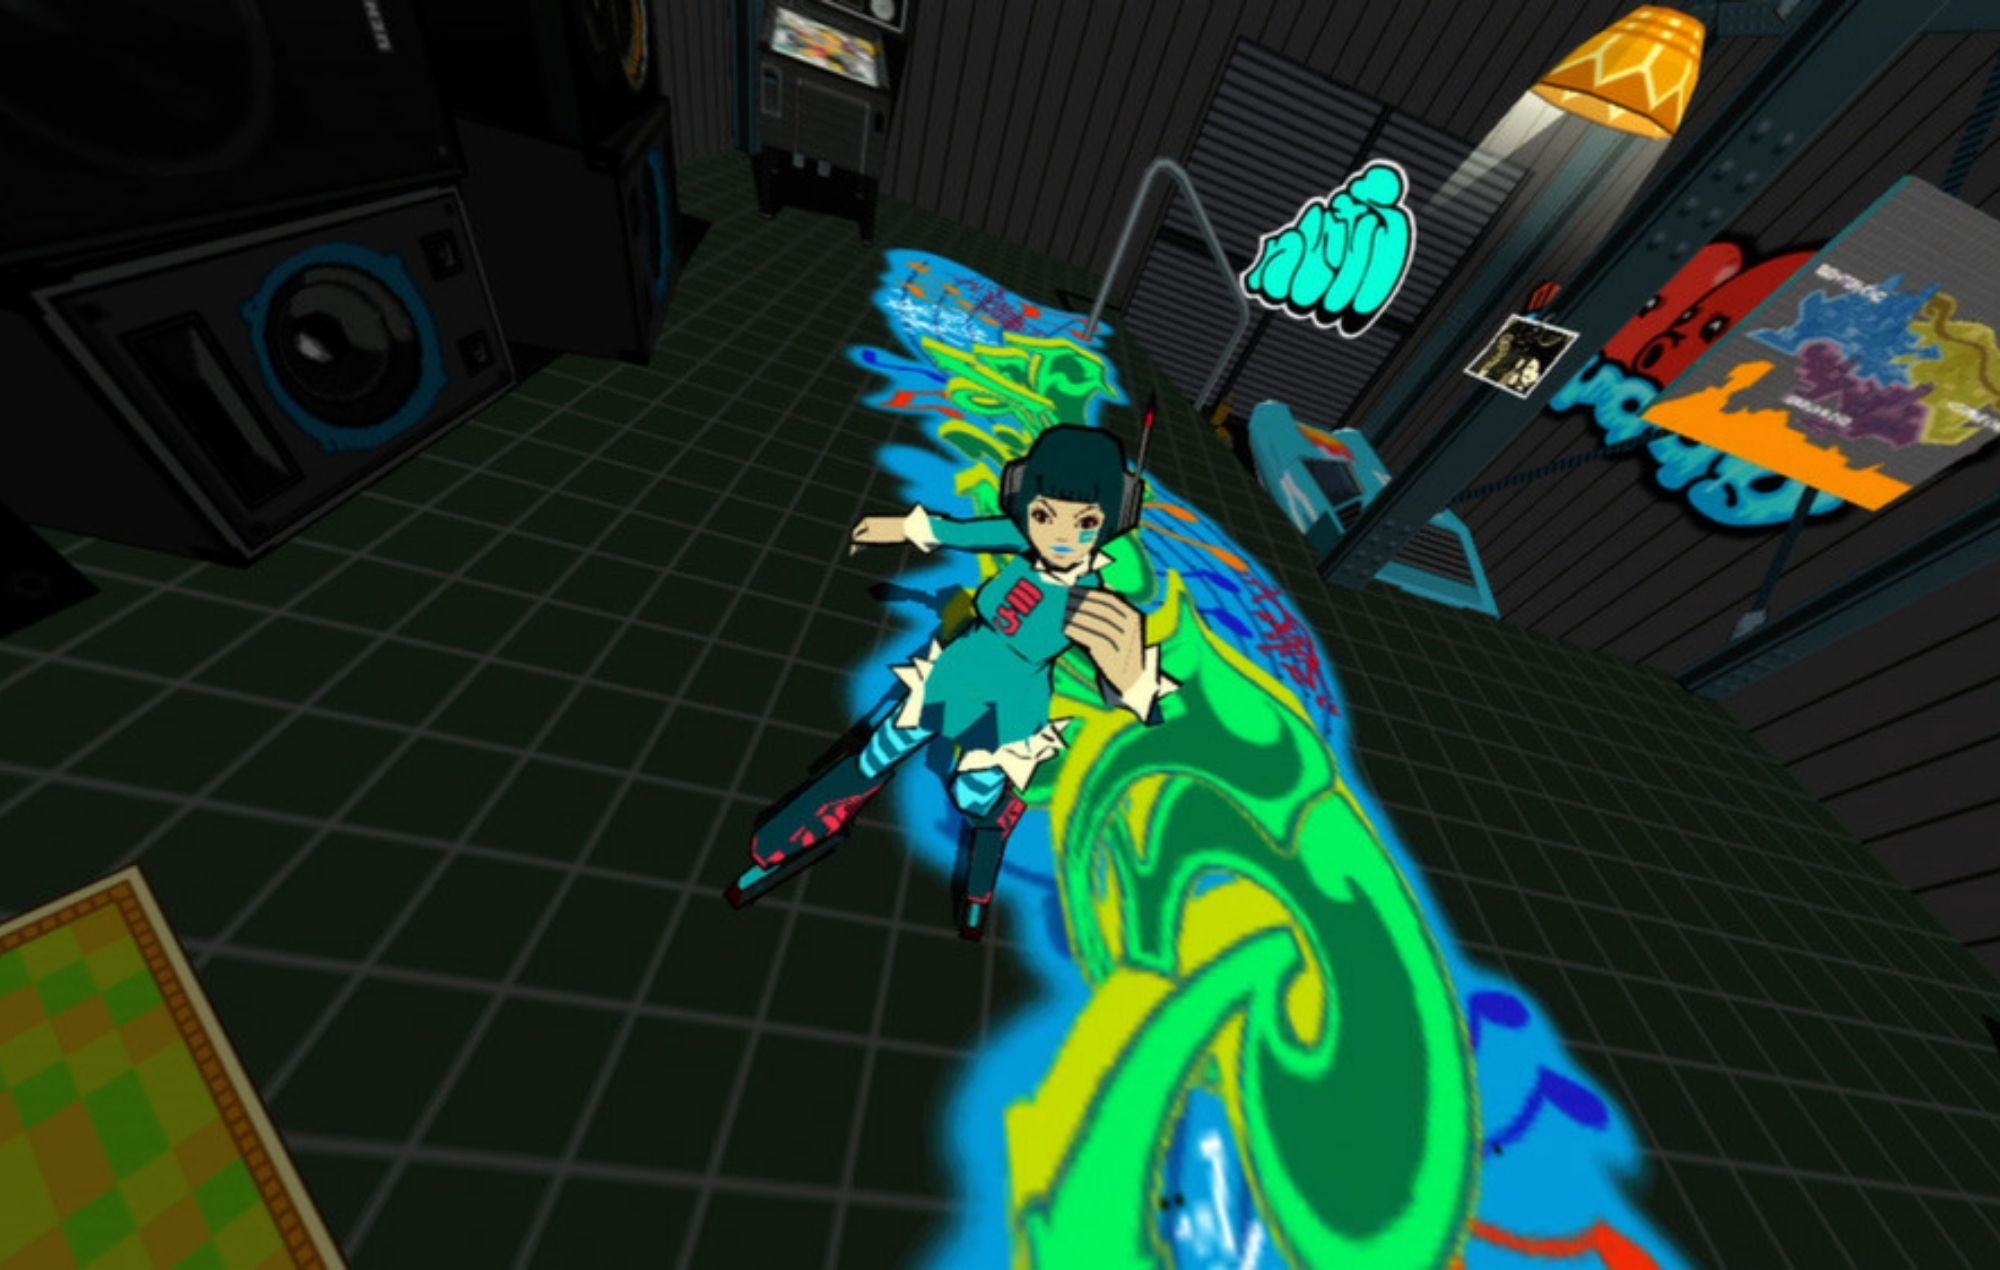 Sega reveals new ‘Jet Set Radio’ and ‘Crazy Taxi’ games are in the works